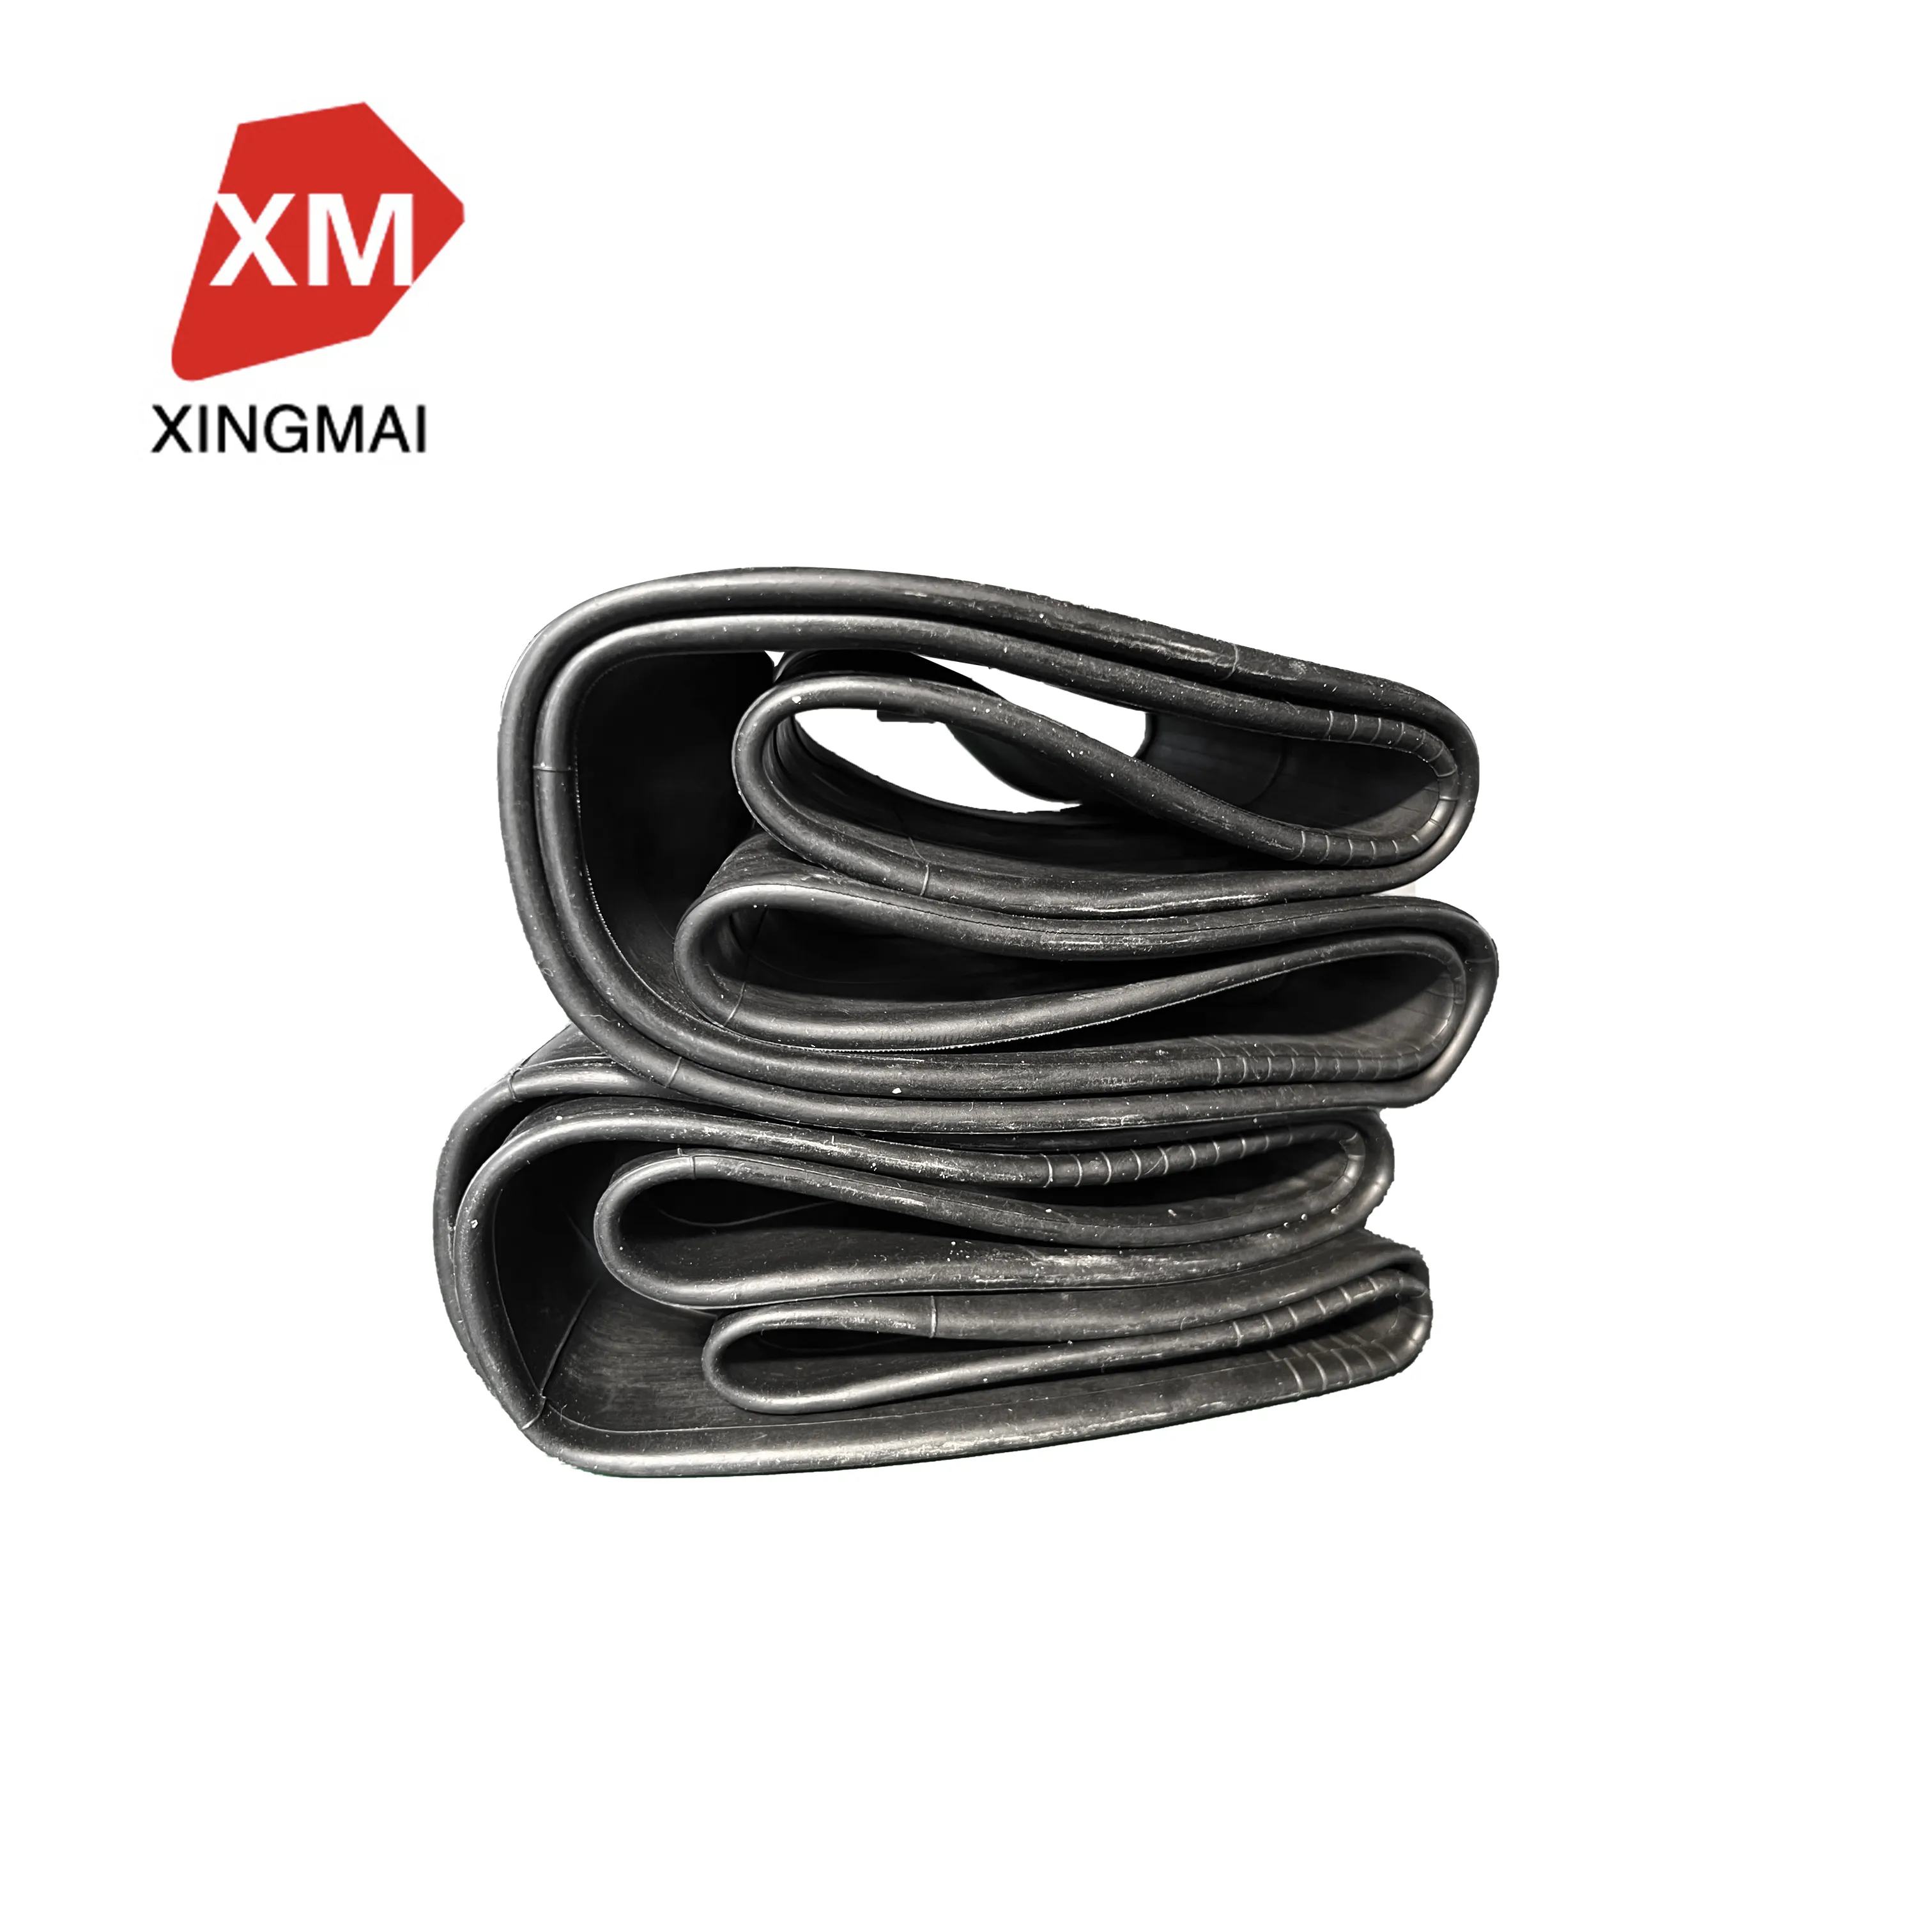 butyl rubber motorcycle inner mousse tube model 3.00-18 for off road motorcycles